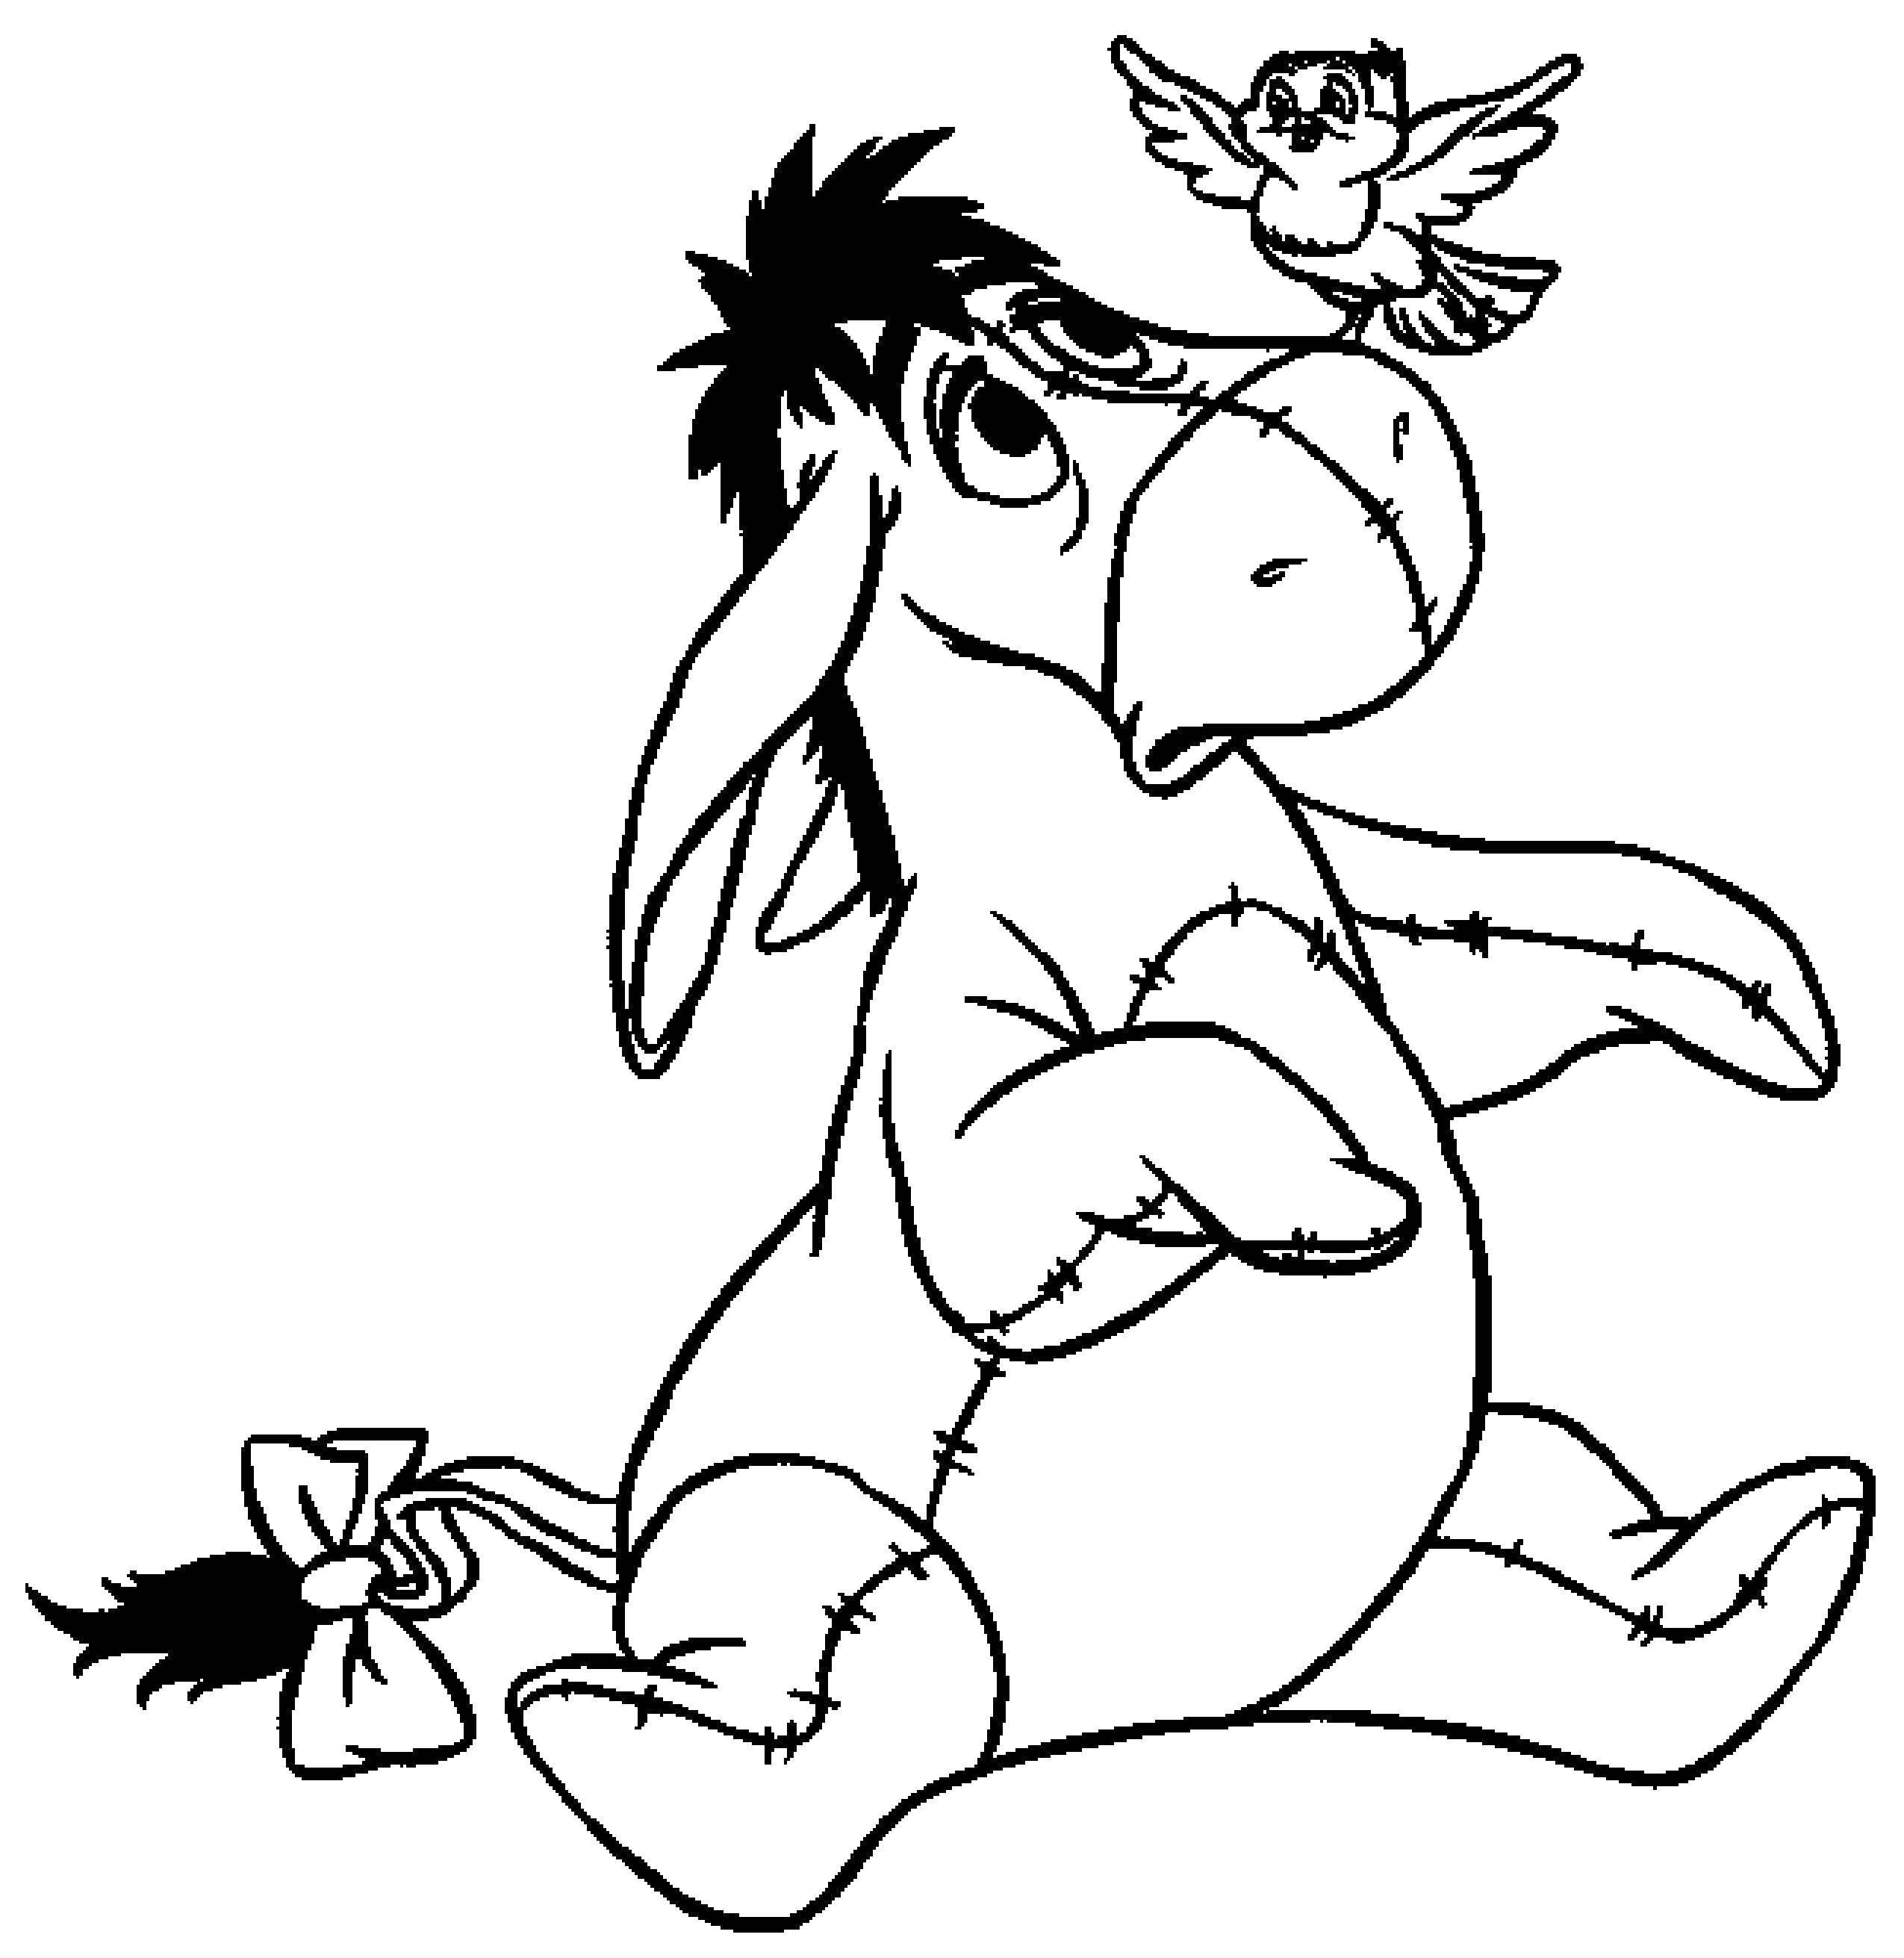 Coloring A bird perched on ia. Category Disney coloring pages. Tags:  Disney, Winnie The Pooh.